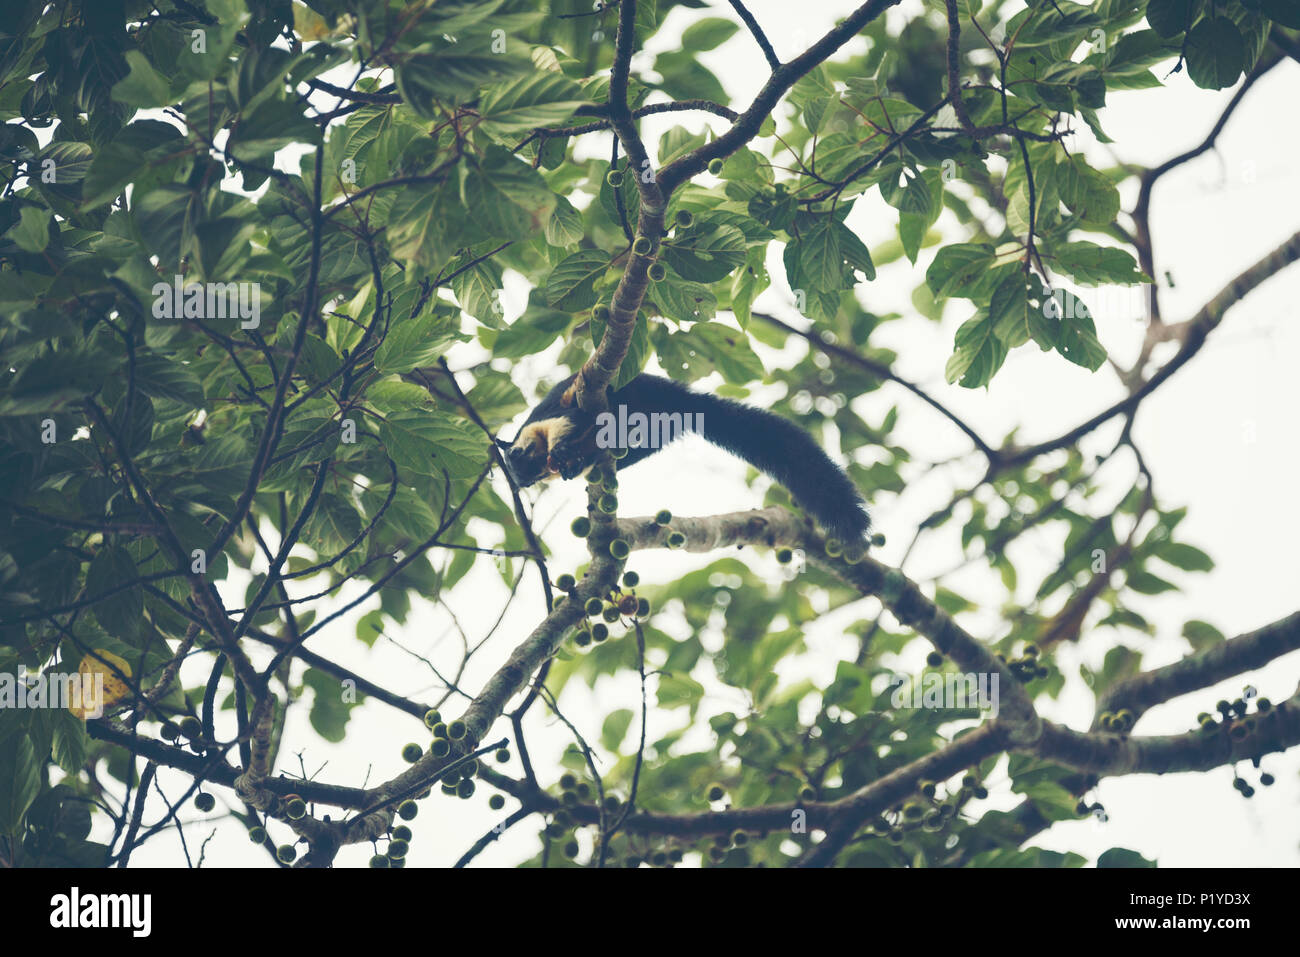 giant black squirrel on tree in Khao Yai National Par, vintage filter image Stock Photo